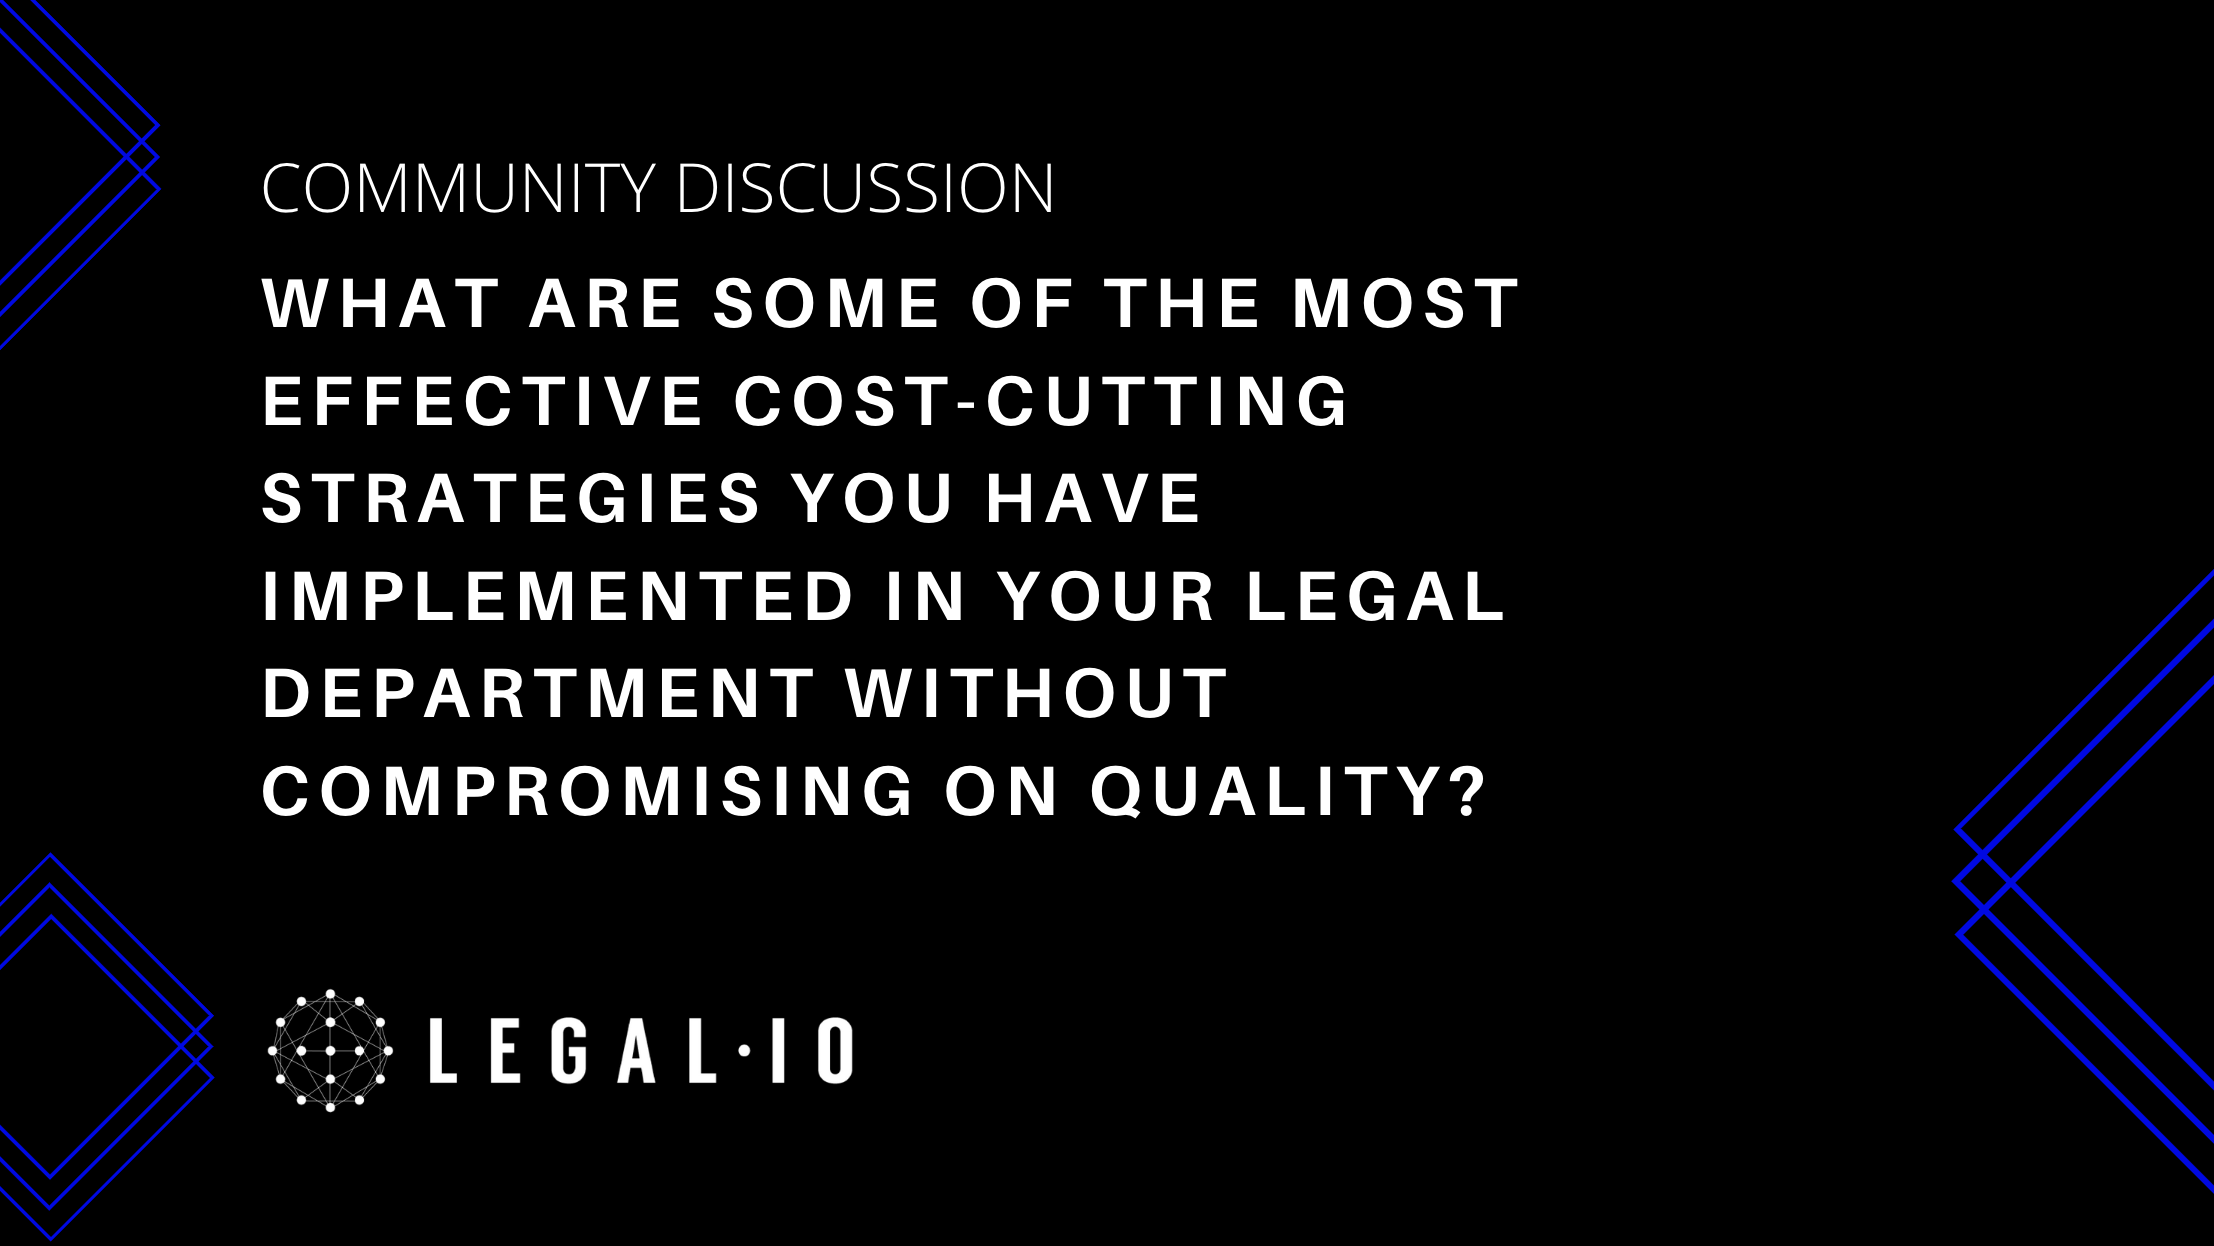 Community Discussion: What are some of the most effective cost-cutting strategies you have implemented in your legal department without compromising on quality?